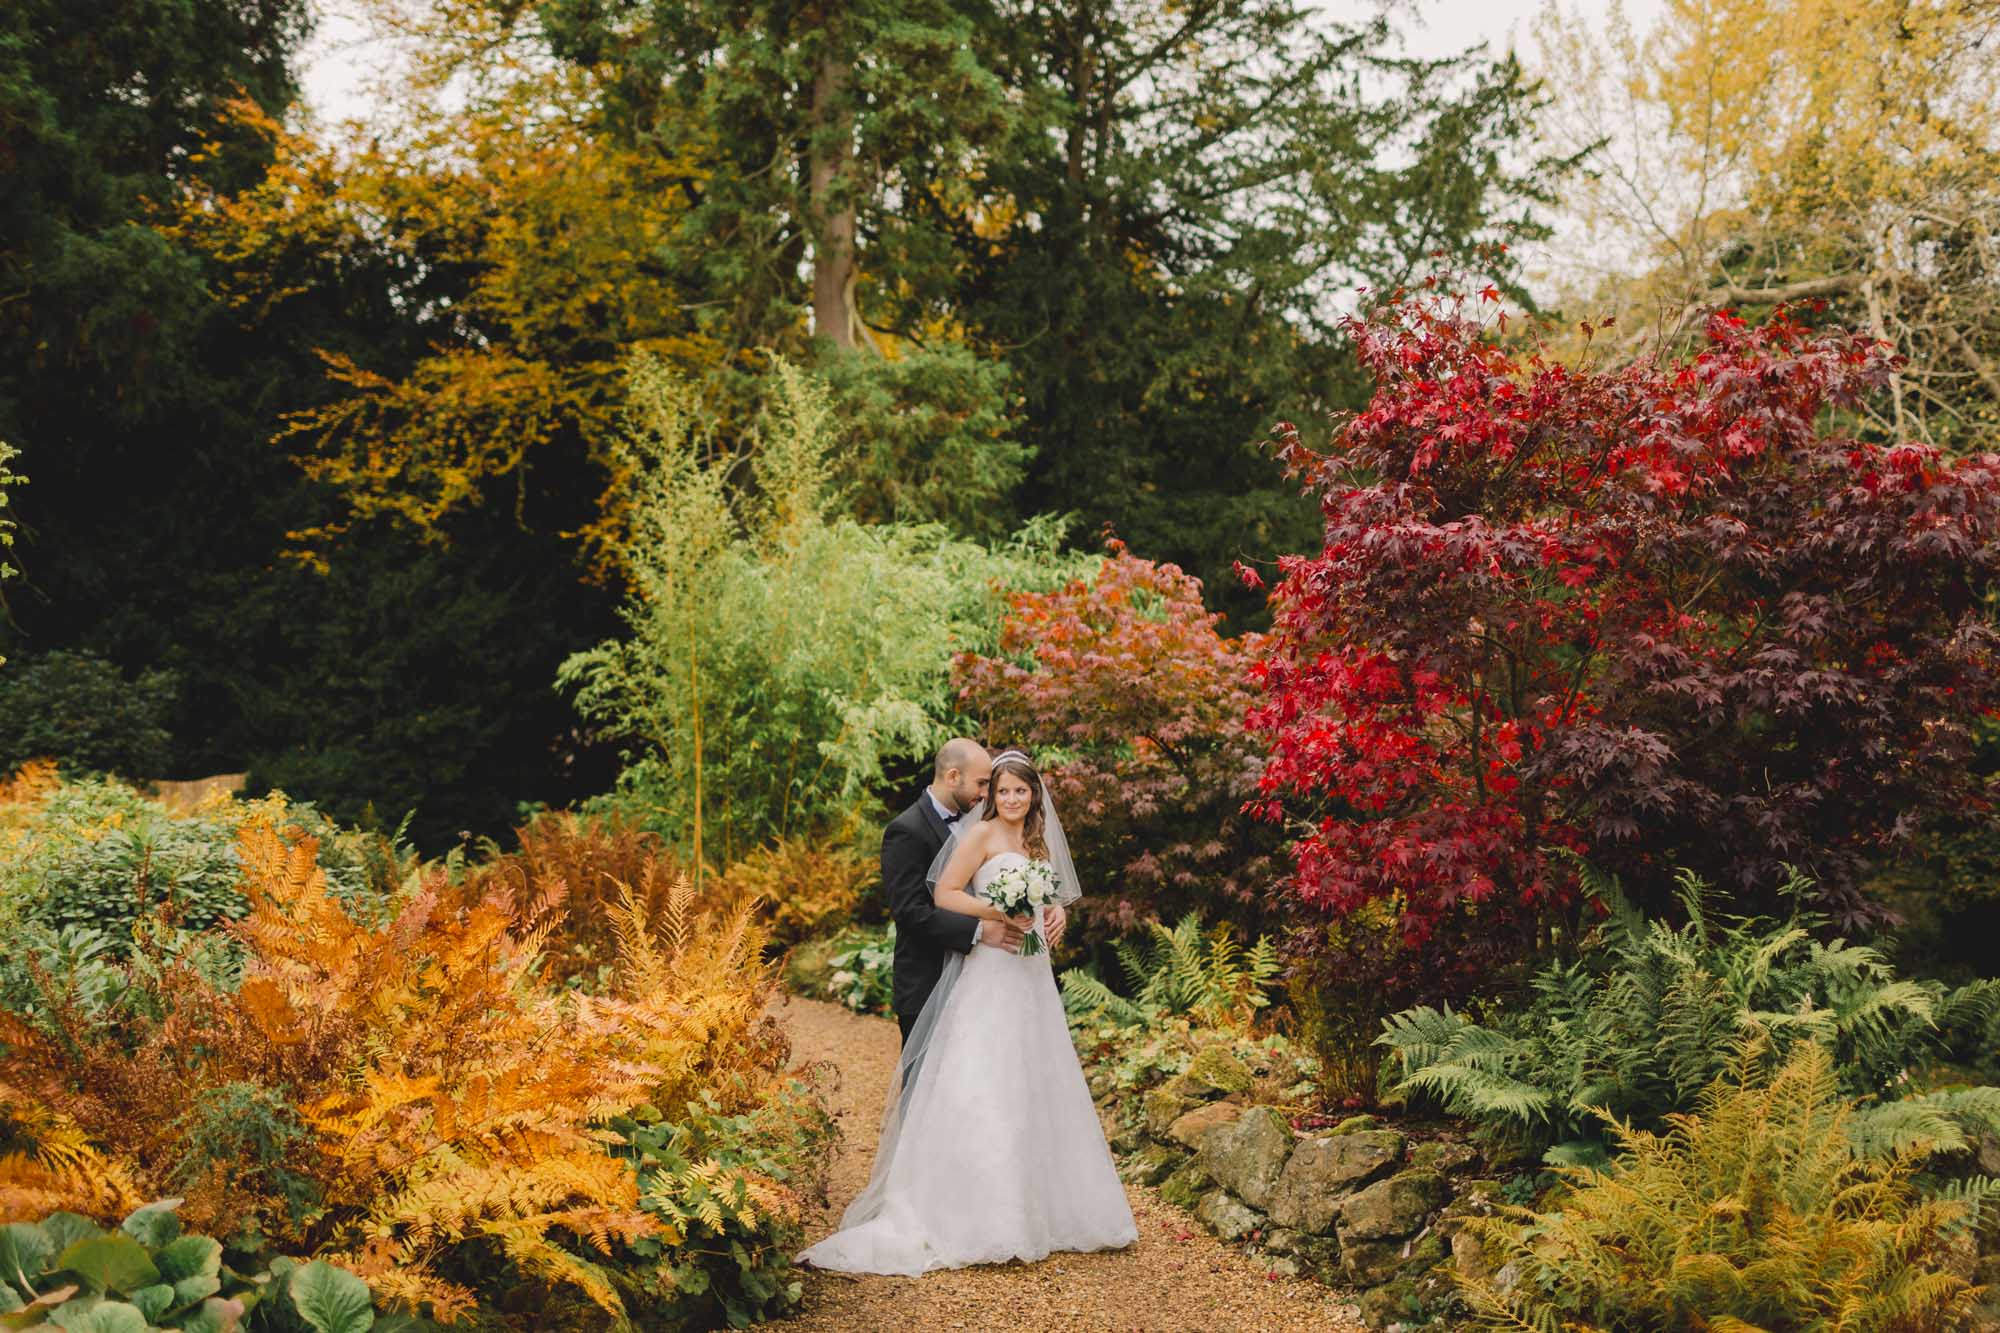 Bride and groom hug closely on their wedding day in Autumn at Wotton House.